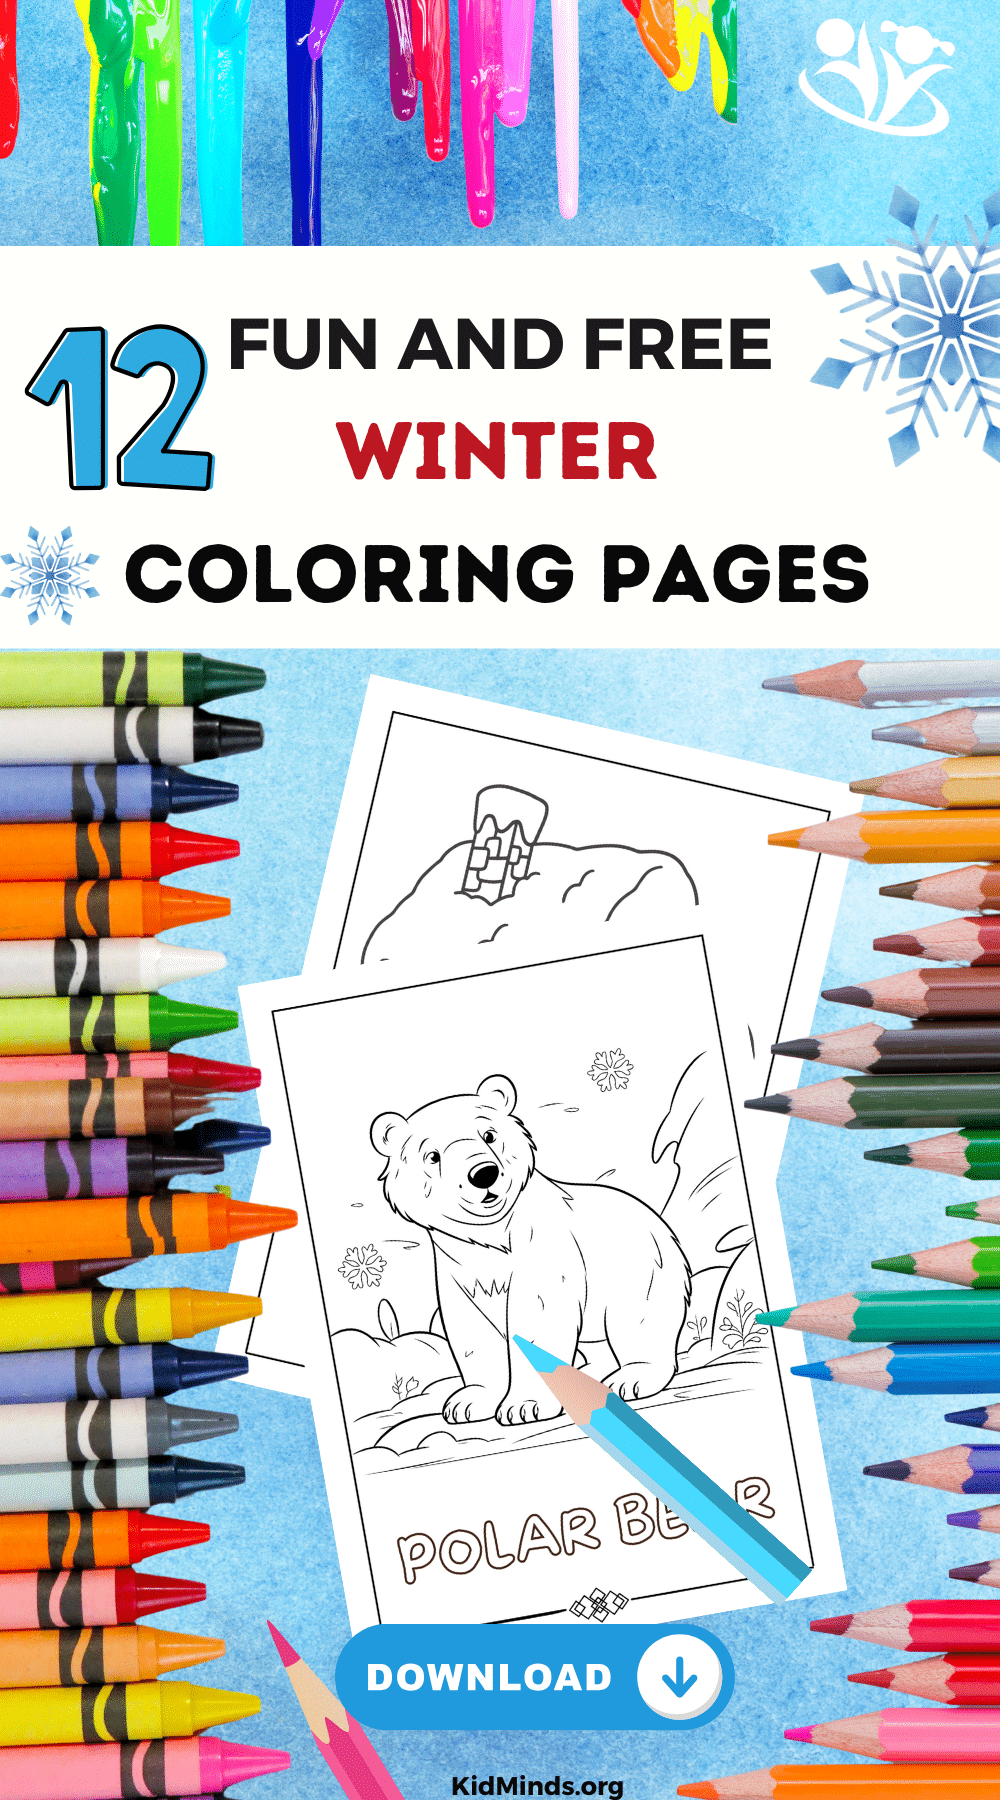 Our winter coloring pages are perfect for keeping kids entertained and engaged when it’s too cold to play outside.  #kidsactivities #winterfun #freeprintables #coloringpages #winter #kidminds